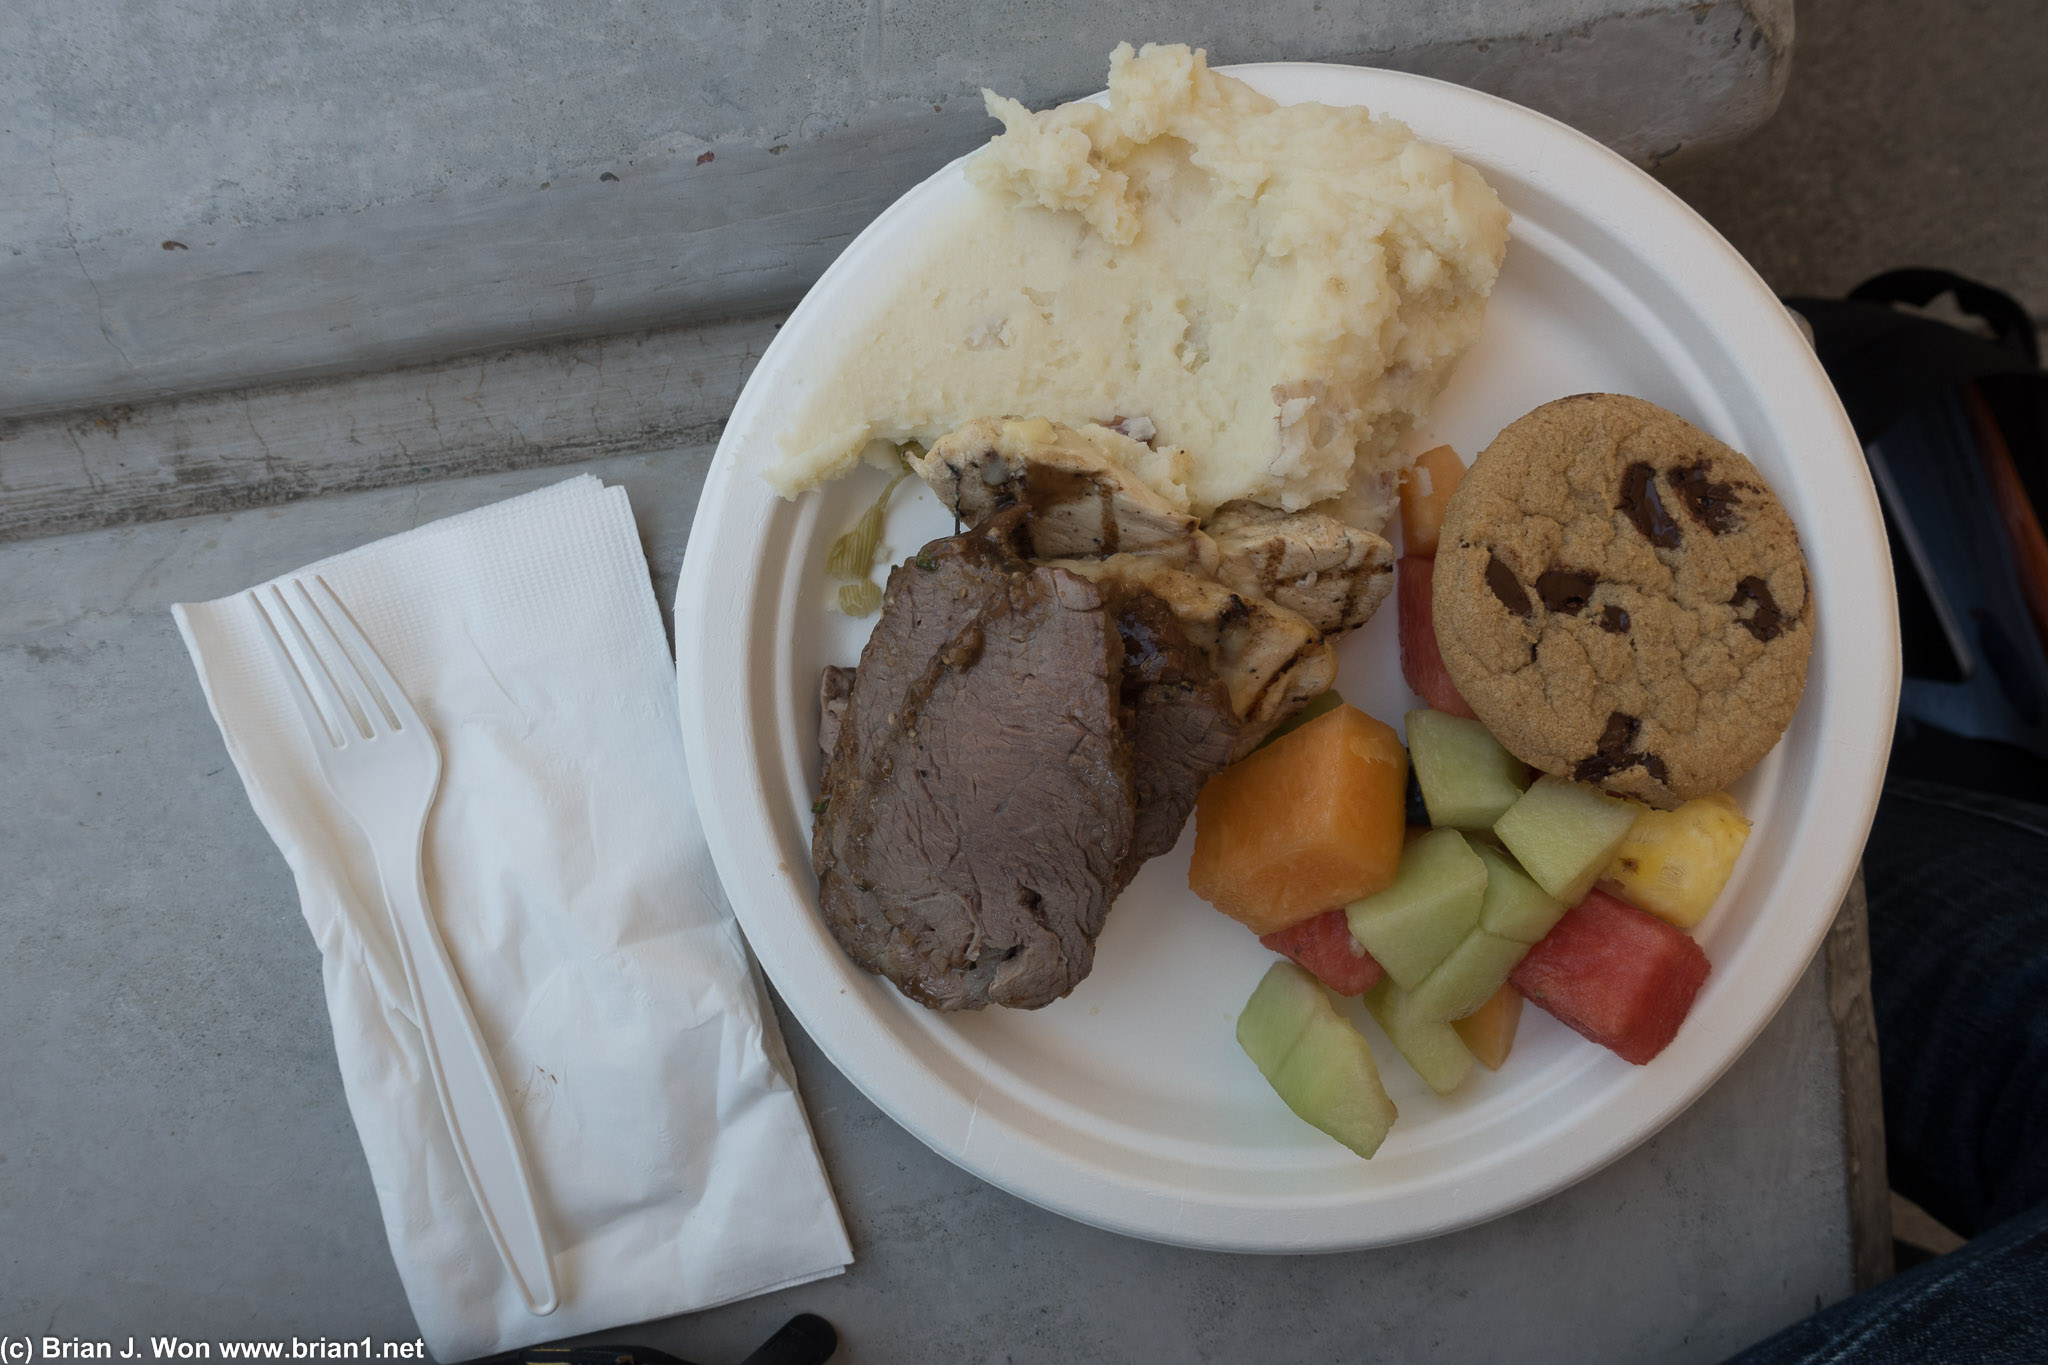 University conference food was actually decent.